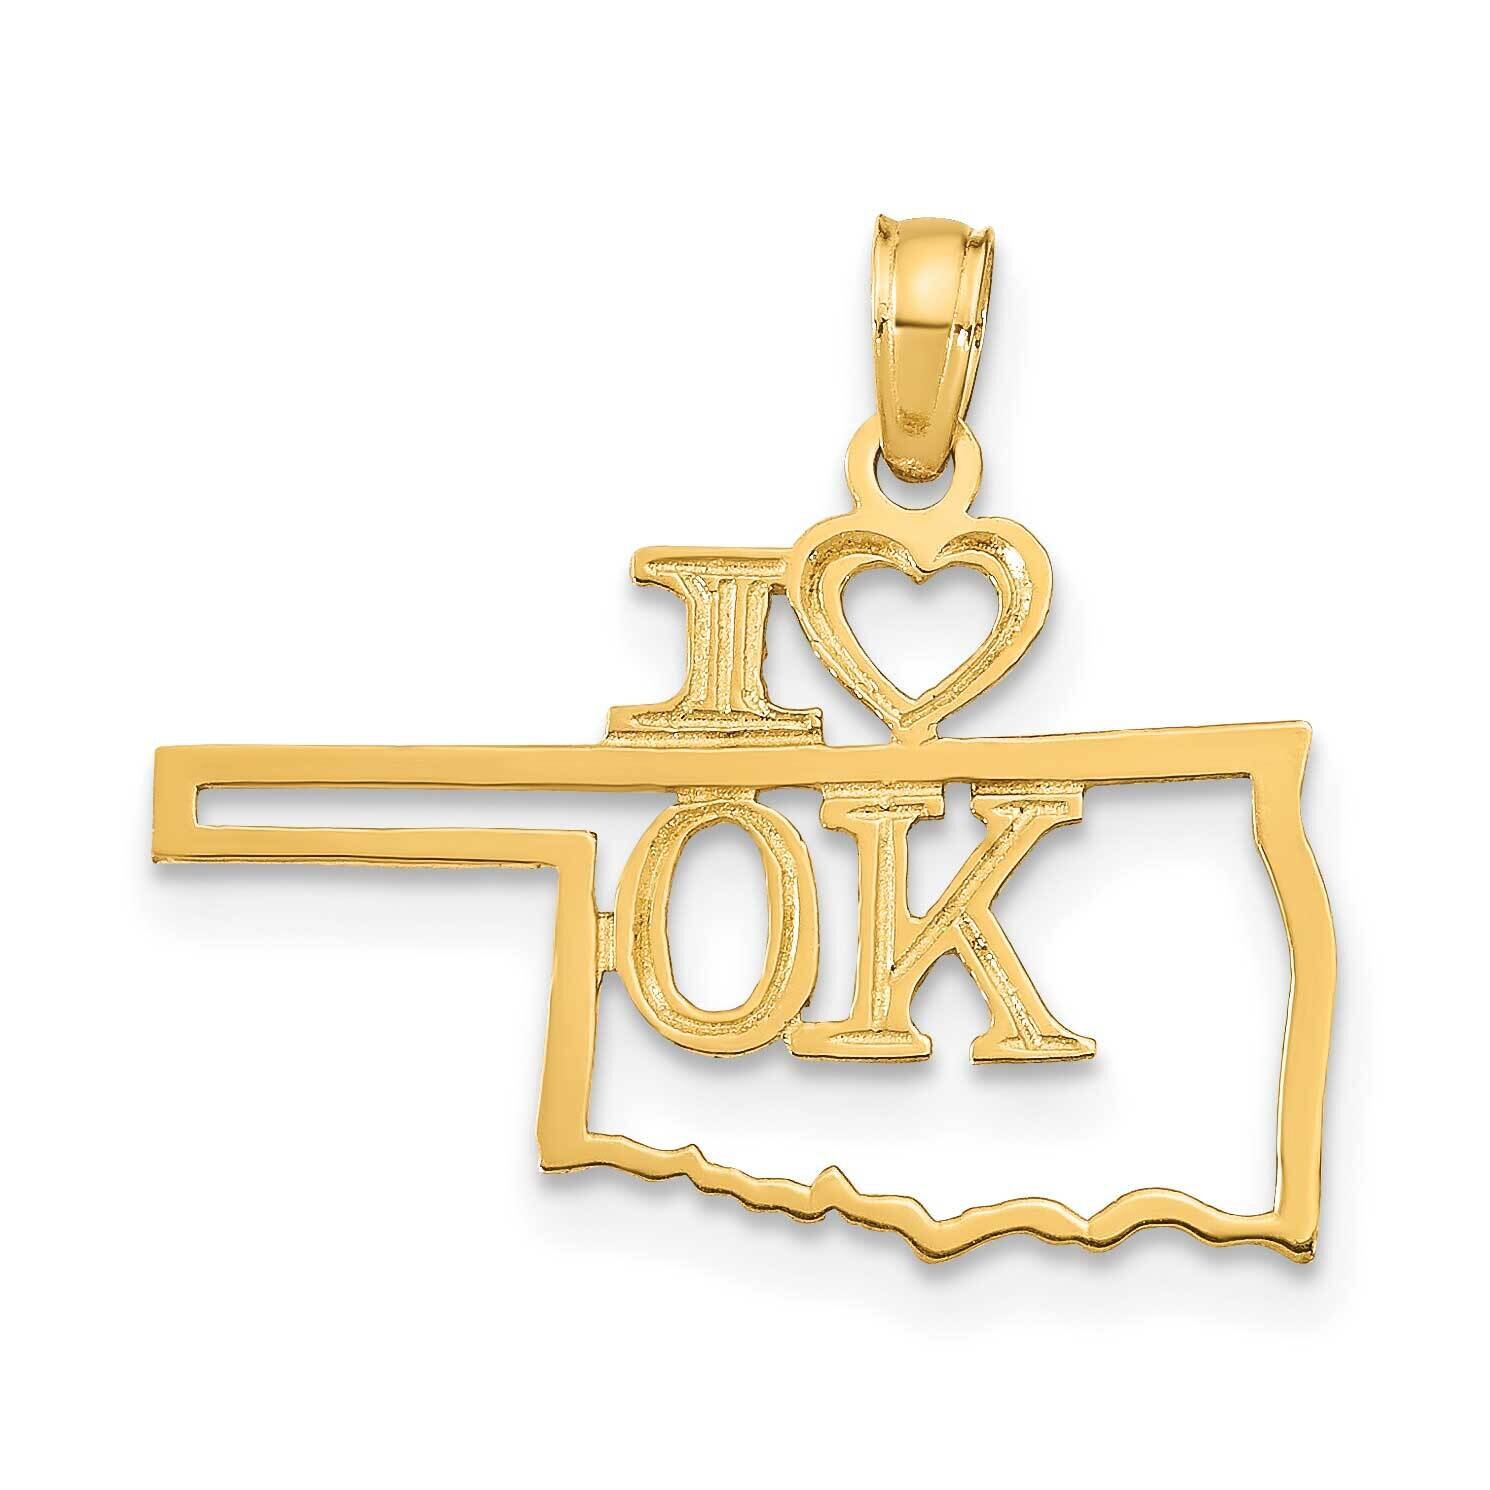 Oklahoma State Pendant 14k Gold Solid D1183